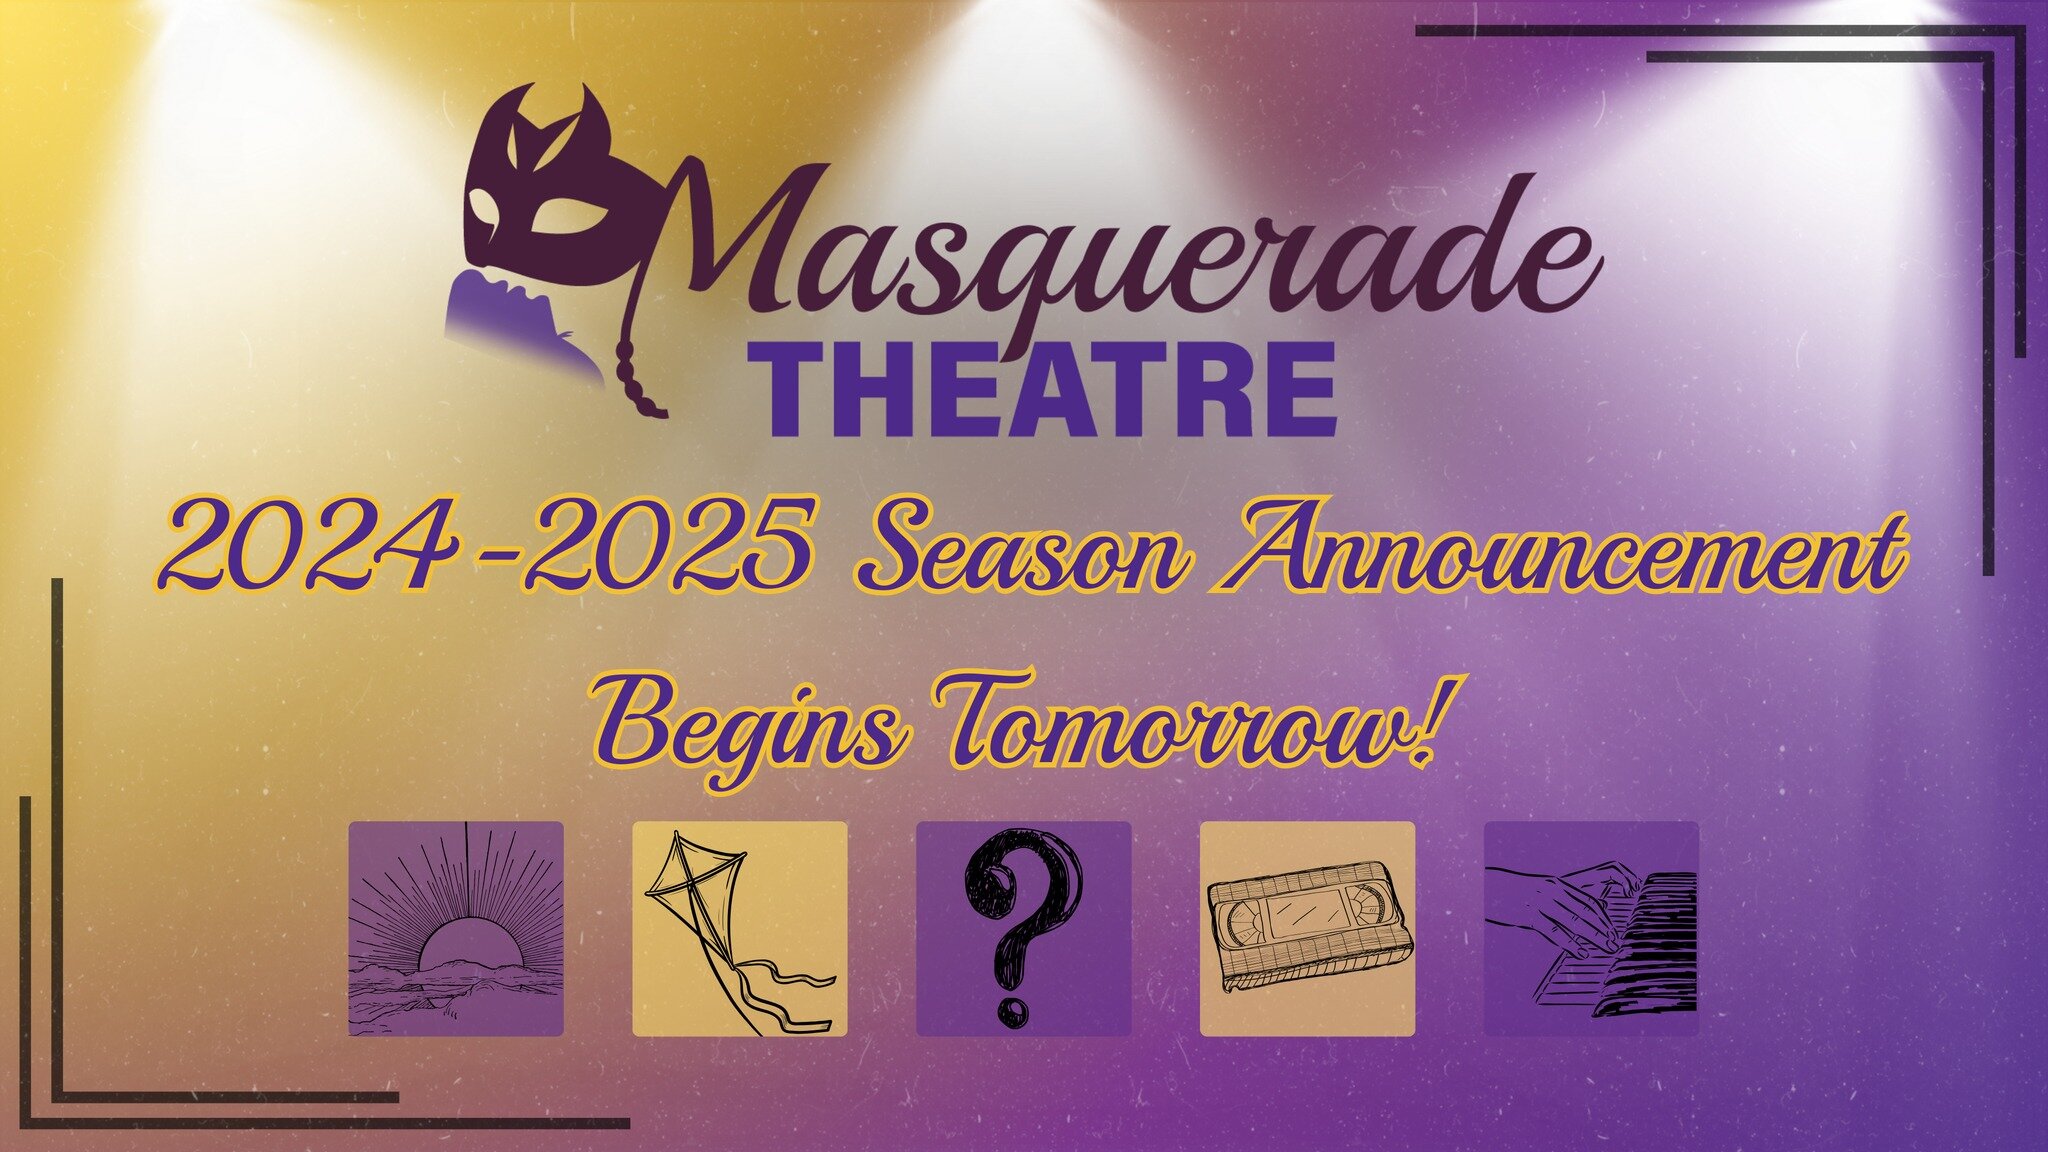 The time has arrived! The Season of Masquerade is upon us!

With our FIRST EVER full season almost completed, we have heard the cries of &quot;what's next?&quot; and are ready to deliver on another year of intimate theatre in our black box! Starting 